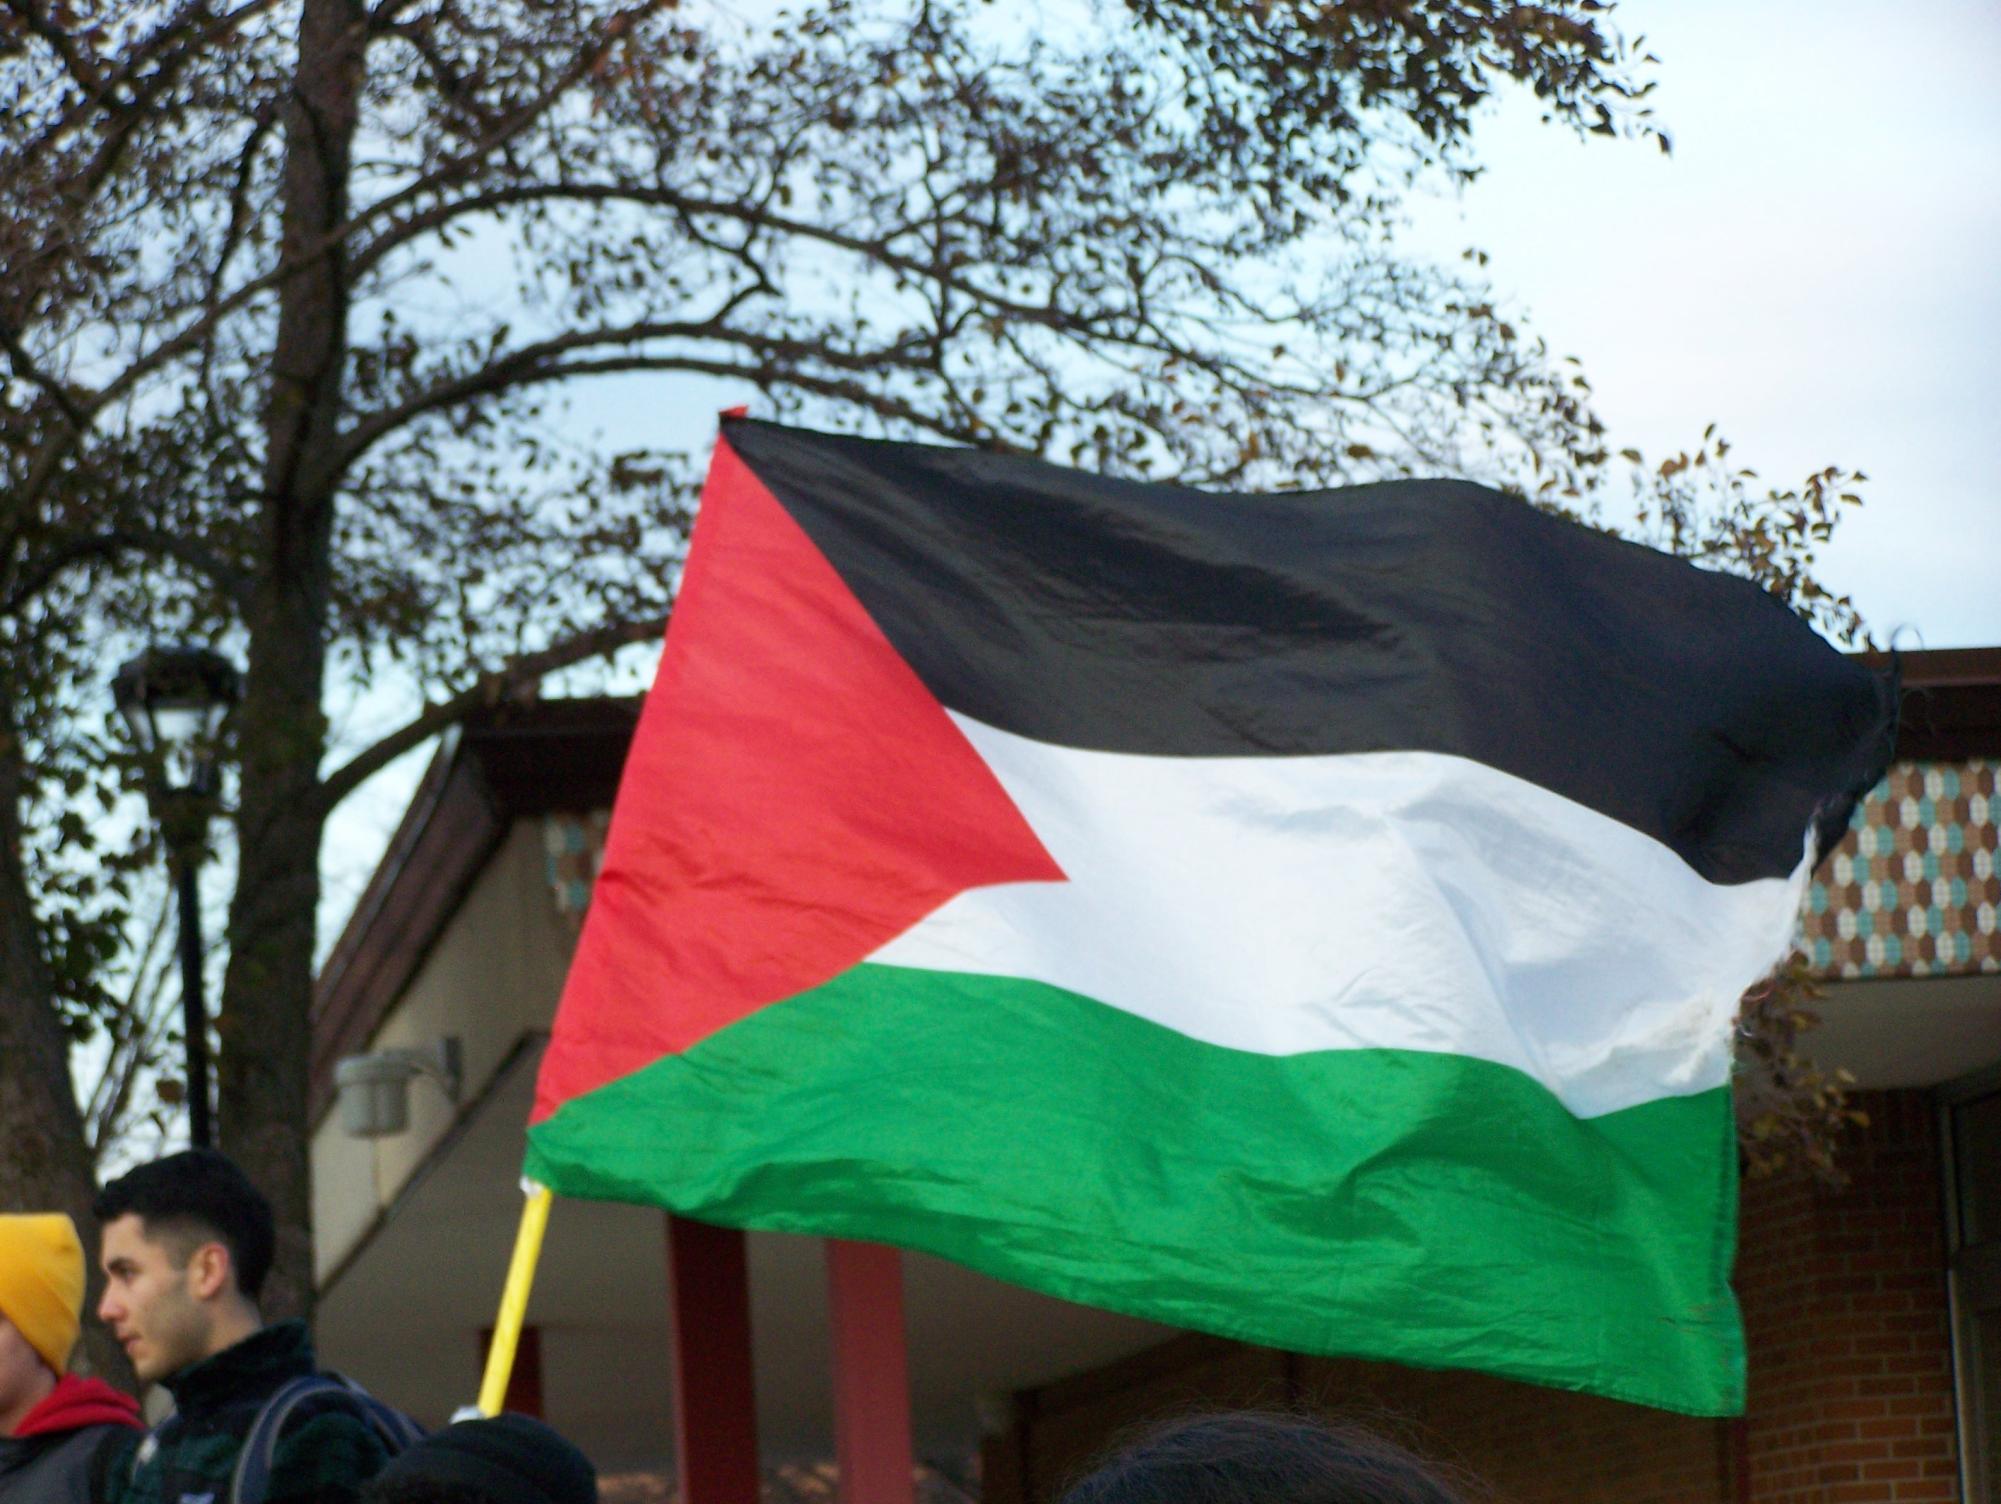 Palestinian flag waving in the air. All photos from Vigil.